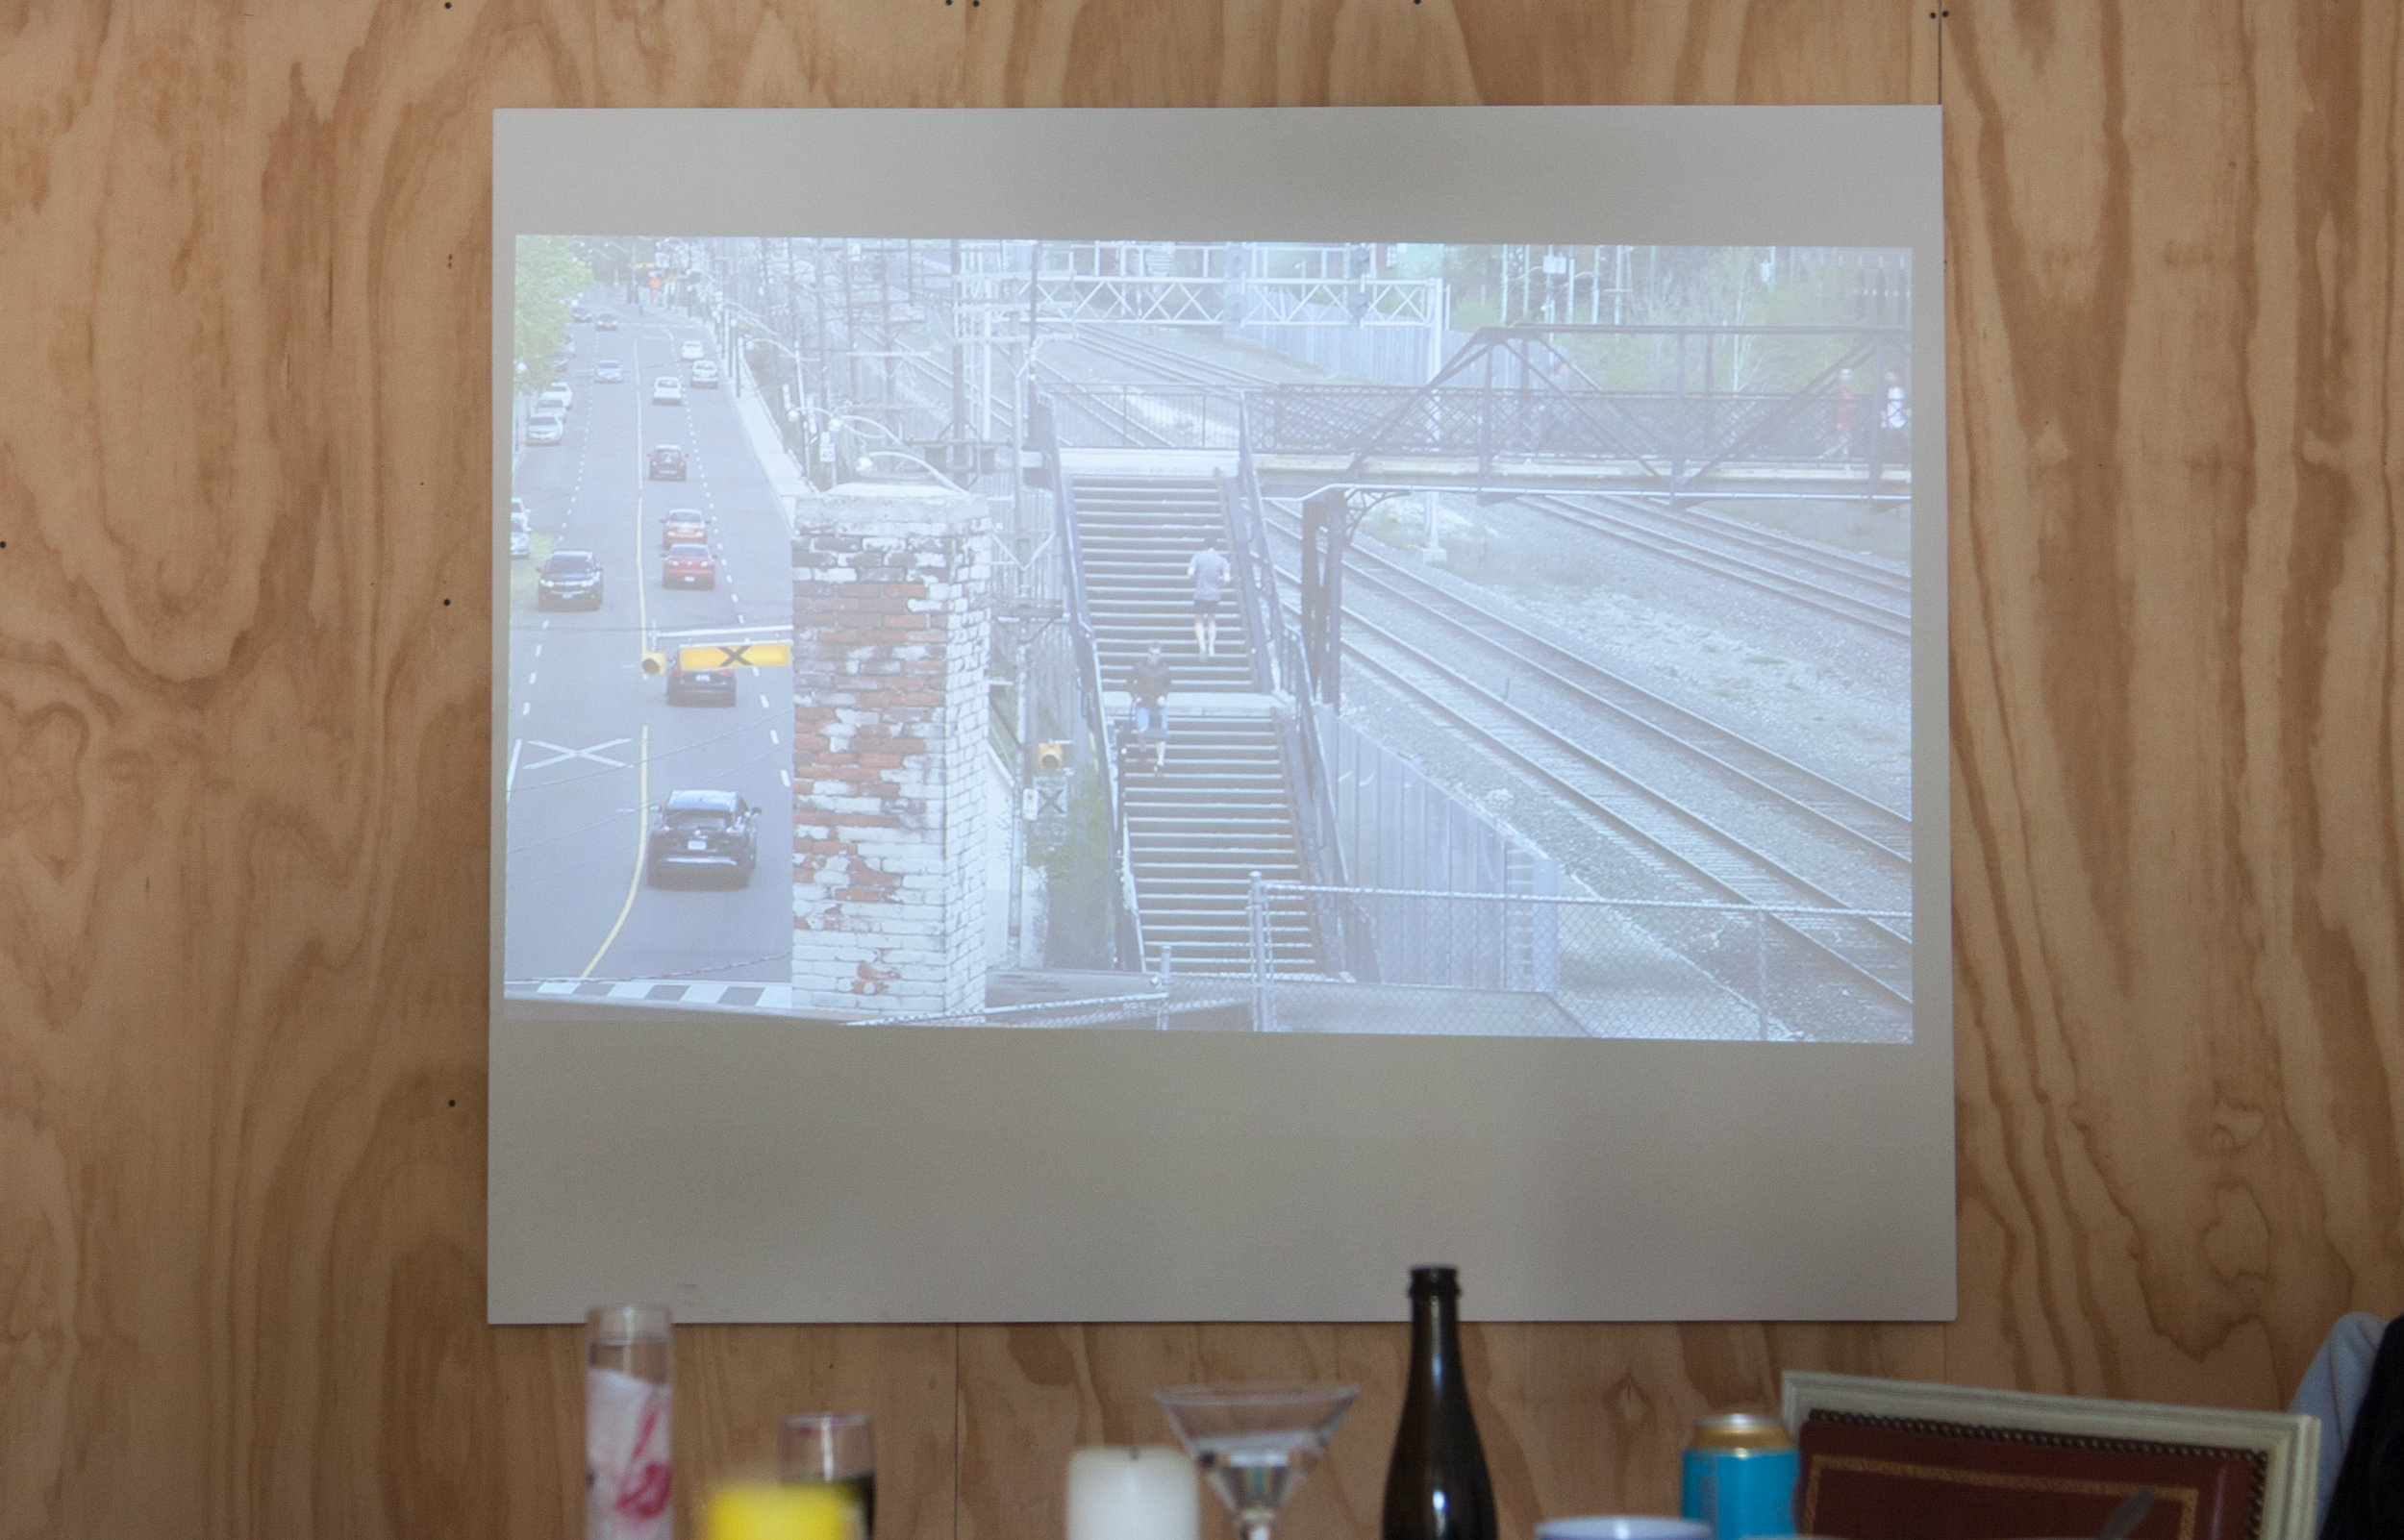   Views From The Table  Video projection featuring immersive audio of passing trains. Runtime: 00:49:52 (looped) 